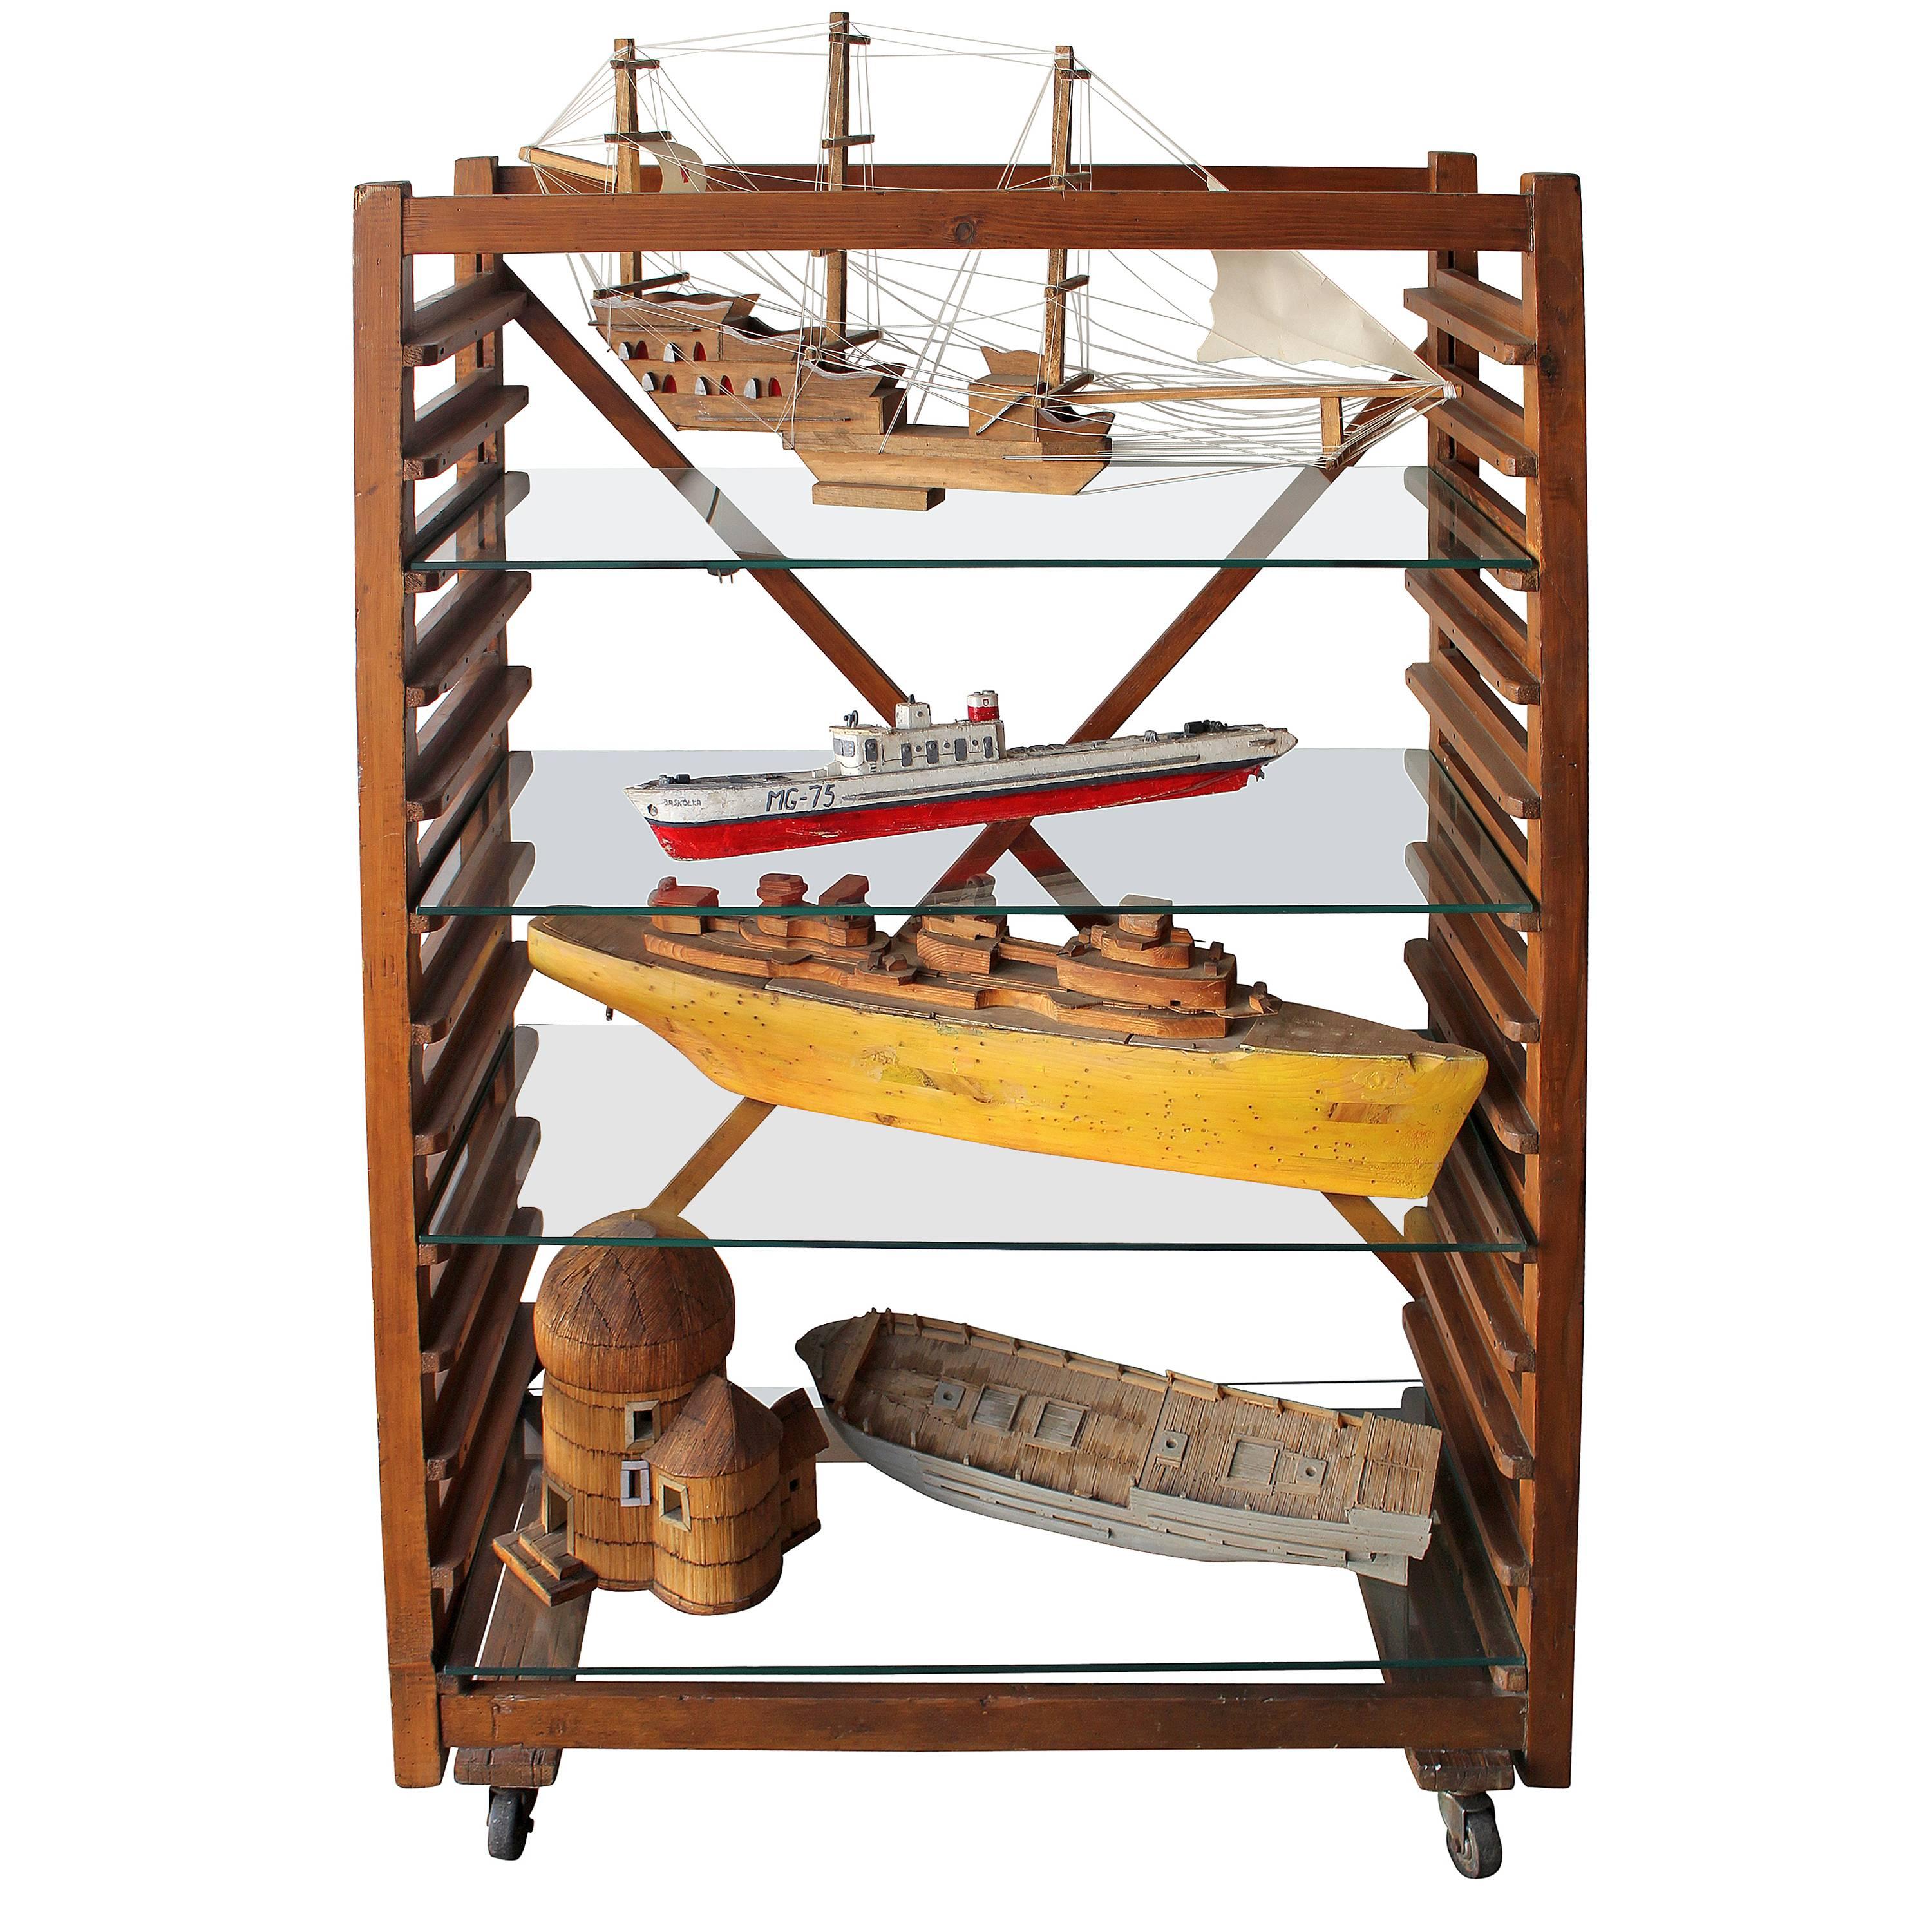 Italian Arts and Crafts Boat Collection